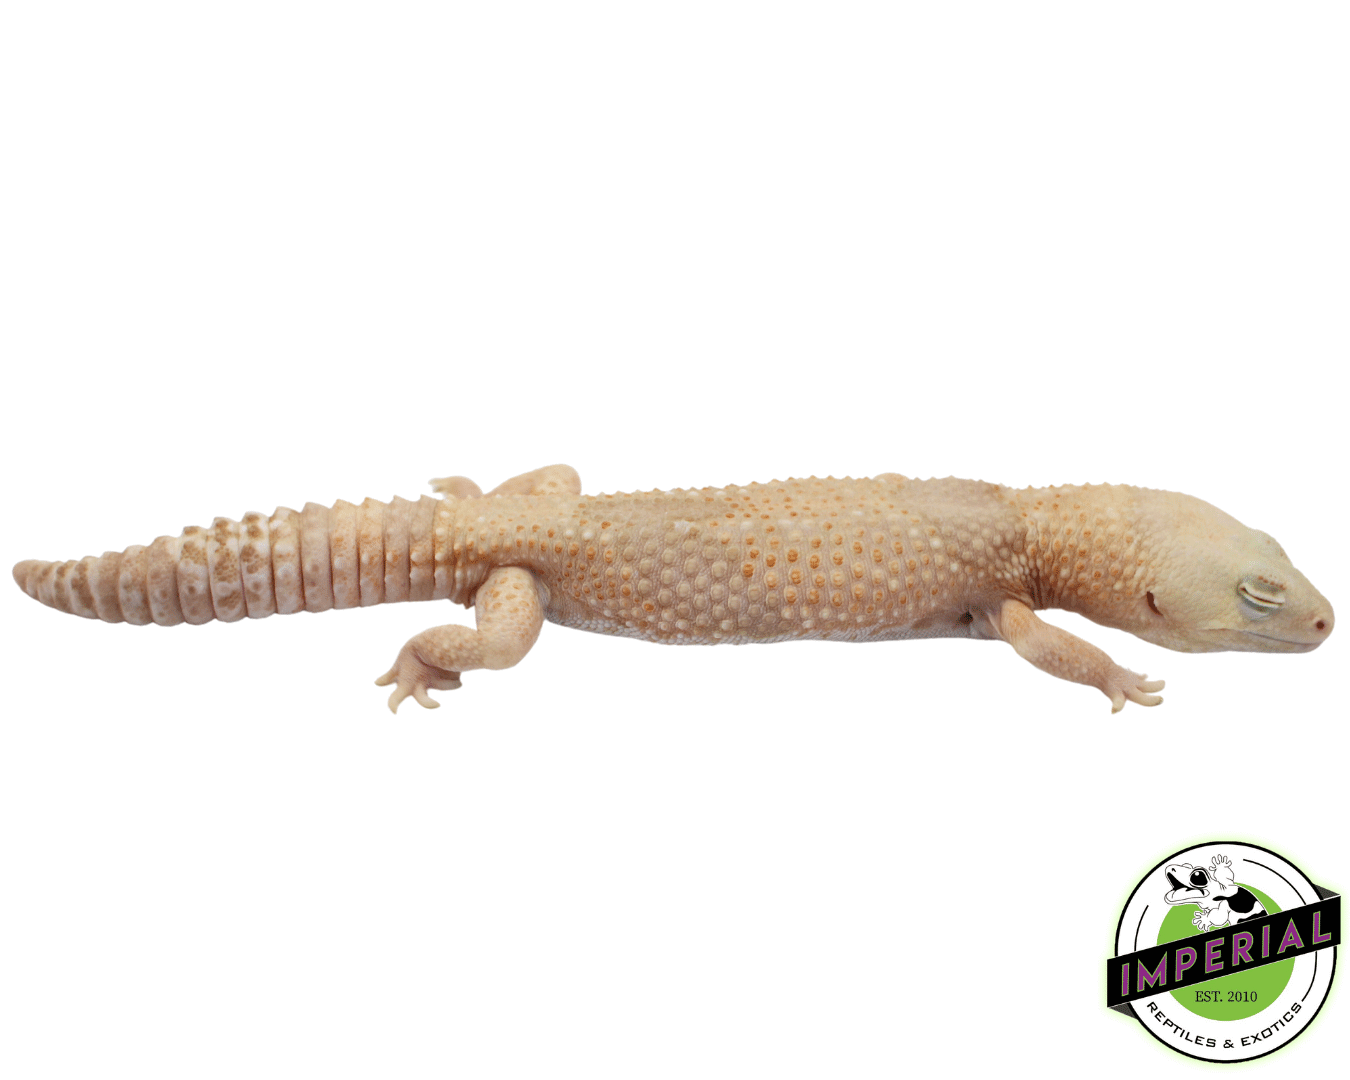 Whiteout Amel African Fat Tail Gecko Adult Male (#73123-01)